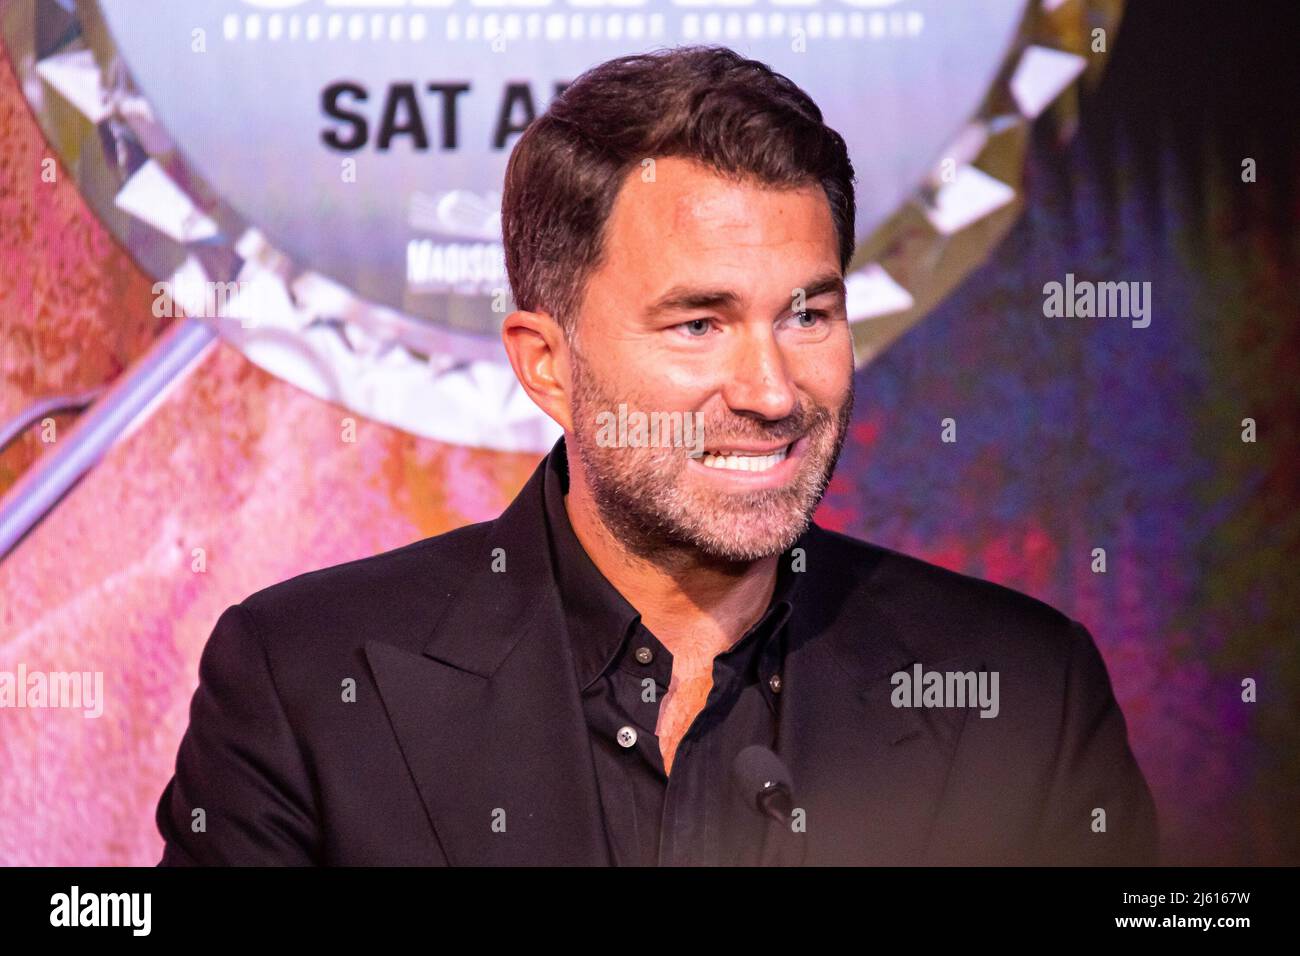 NEW YORK, NY - APRIL 26: Eddie Hearn speaks on stage before Katie Taylor and Amanda Serrano Light up the Empire State Building ahead of their Undisputed Title Fight on Saturday night (April 30) at Madison Square Garden on April 26, 2022 in New York, NY, United States. (Photo by Matt Davies/PxImages) Credit: Px Images/Alamy Live News Stock Photo